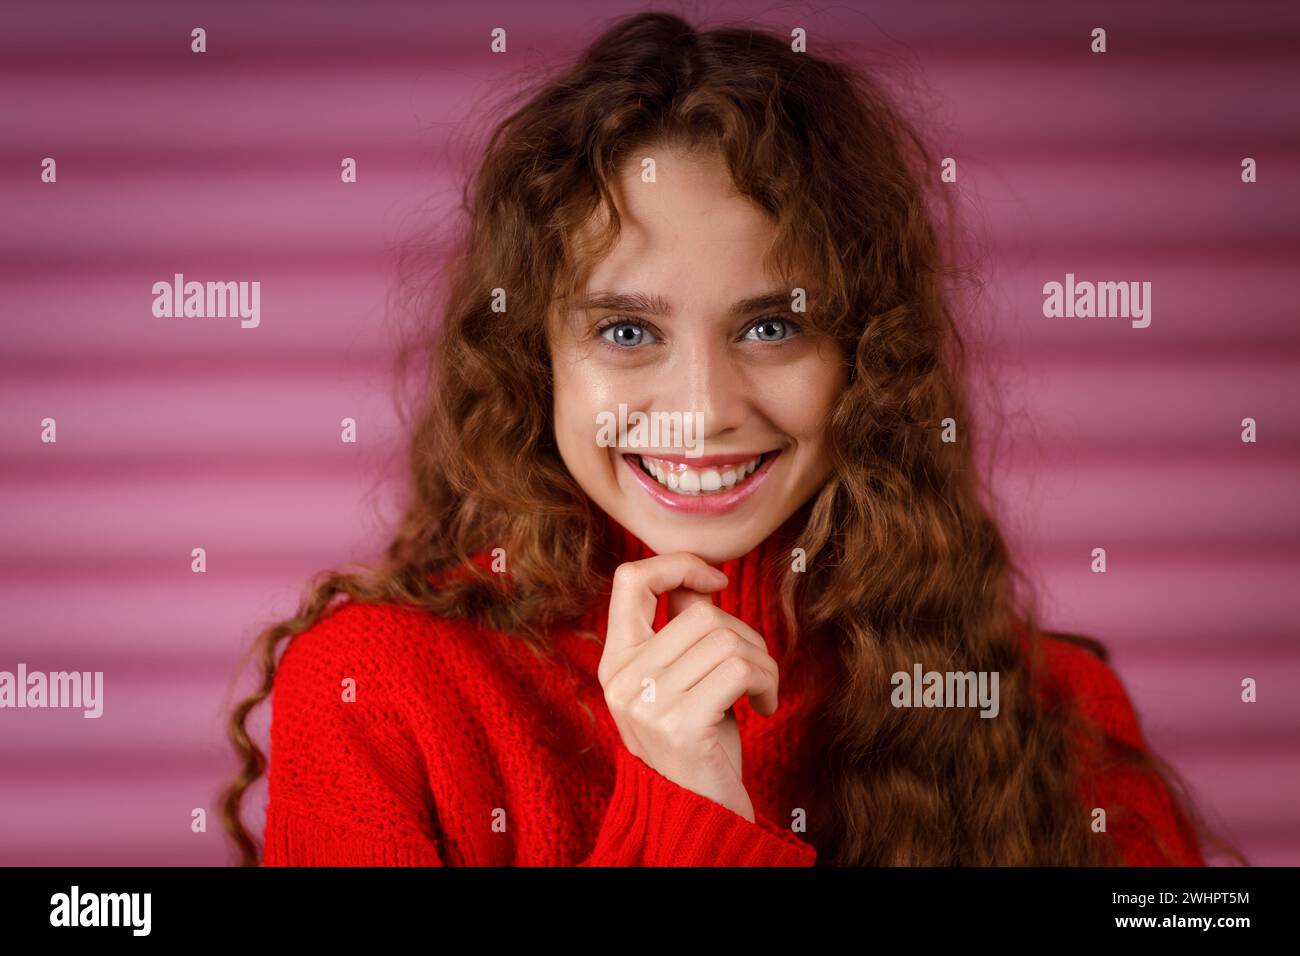 Happy smiling young adult woman wearing winter red sweater indoors looking at camera with joyful smile. Stock Photo